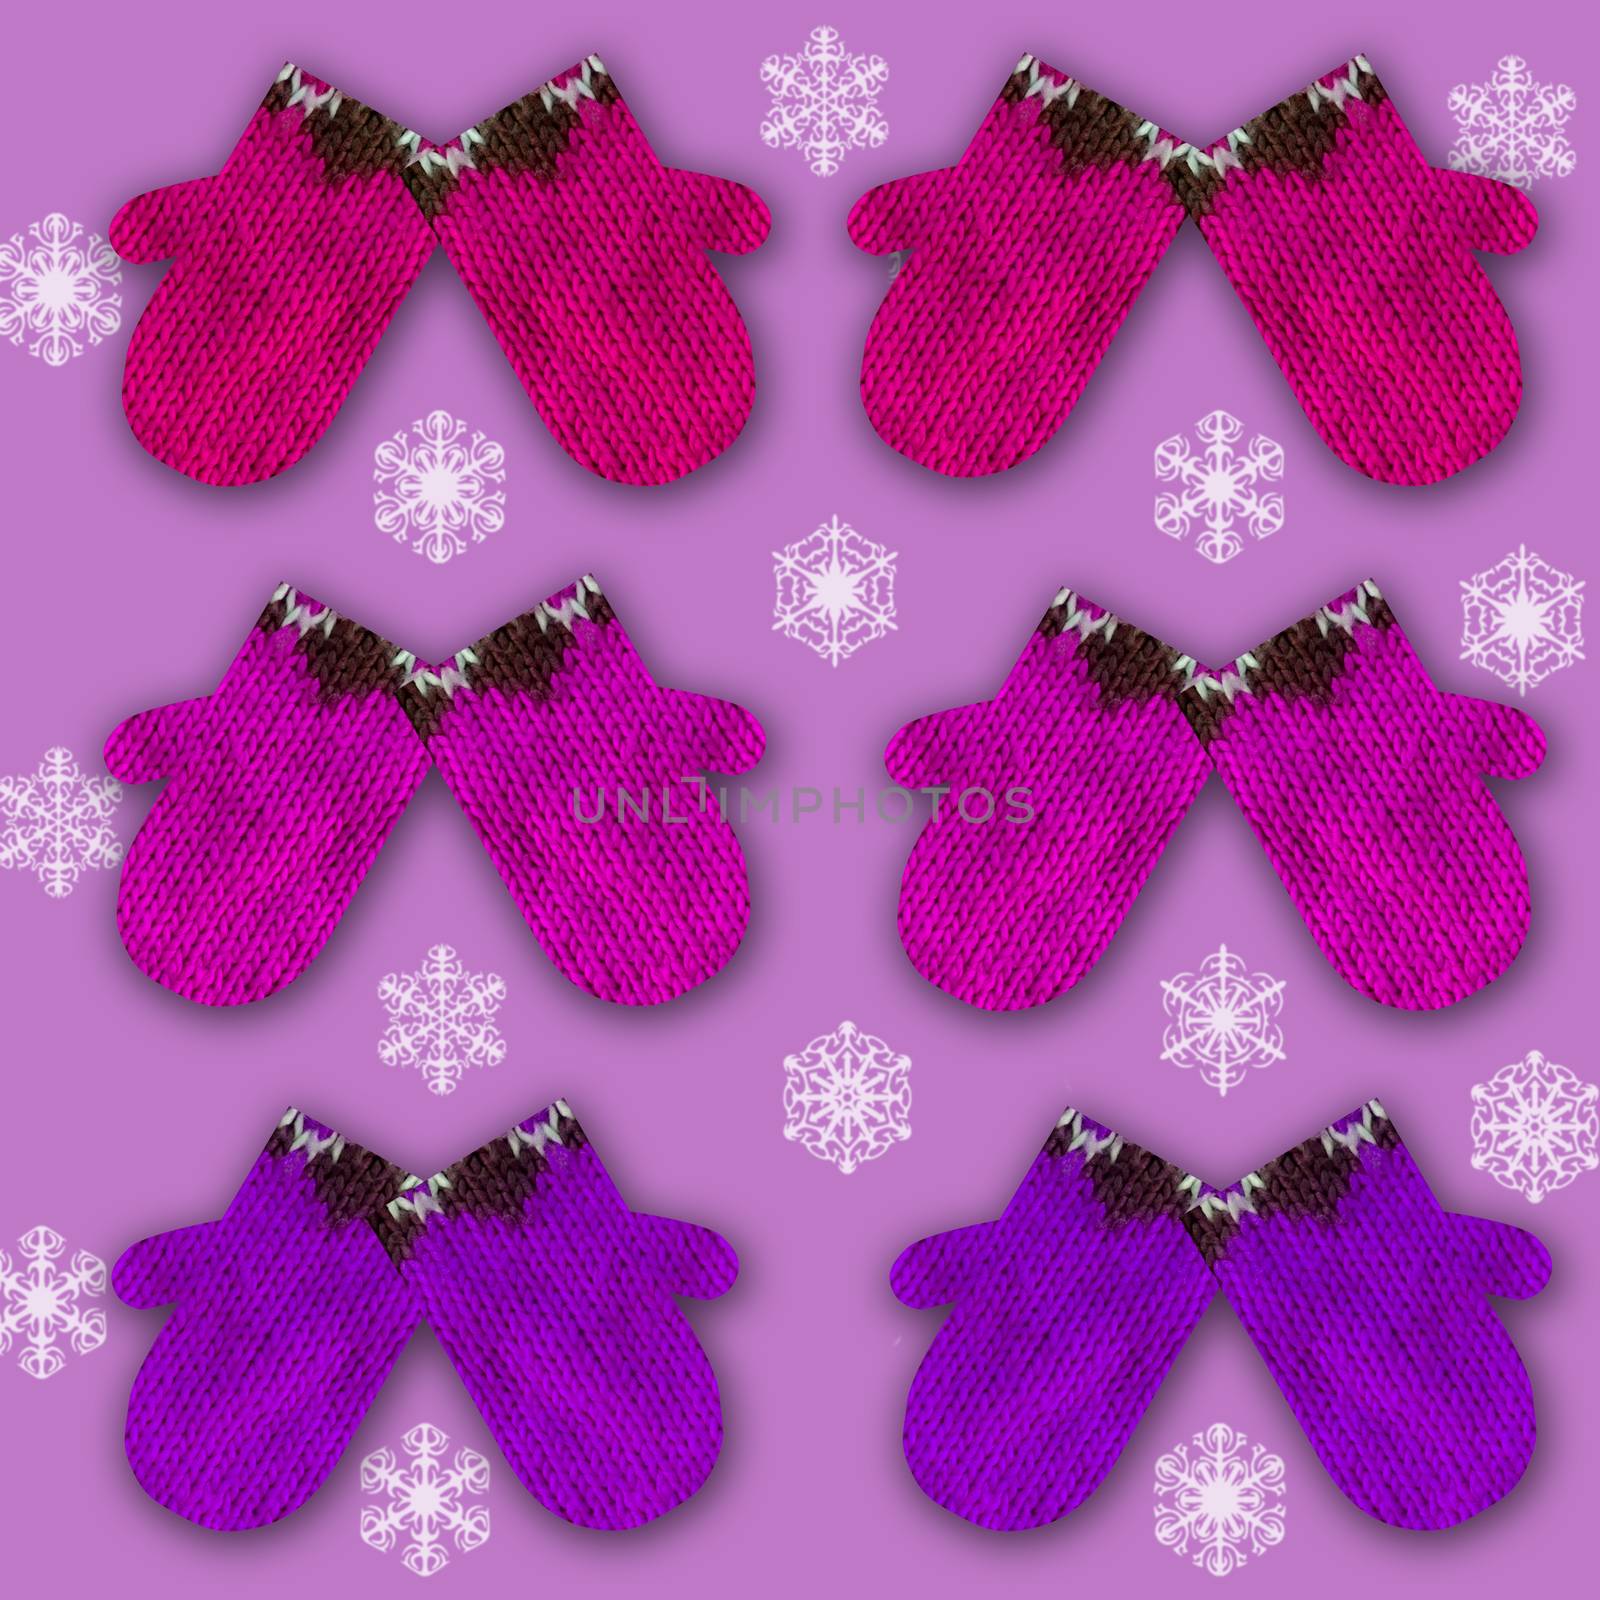  The pattern with decorative ornamented mittens on purple background with snowflakes